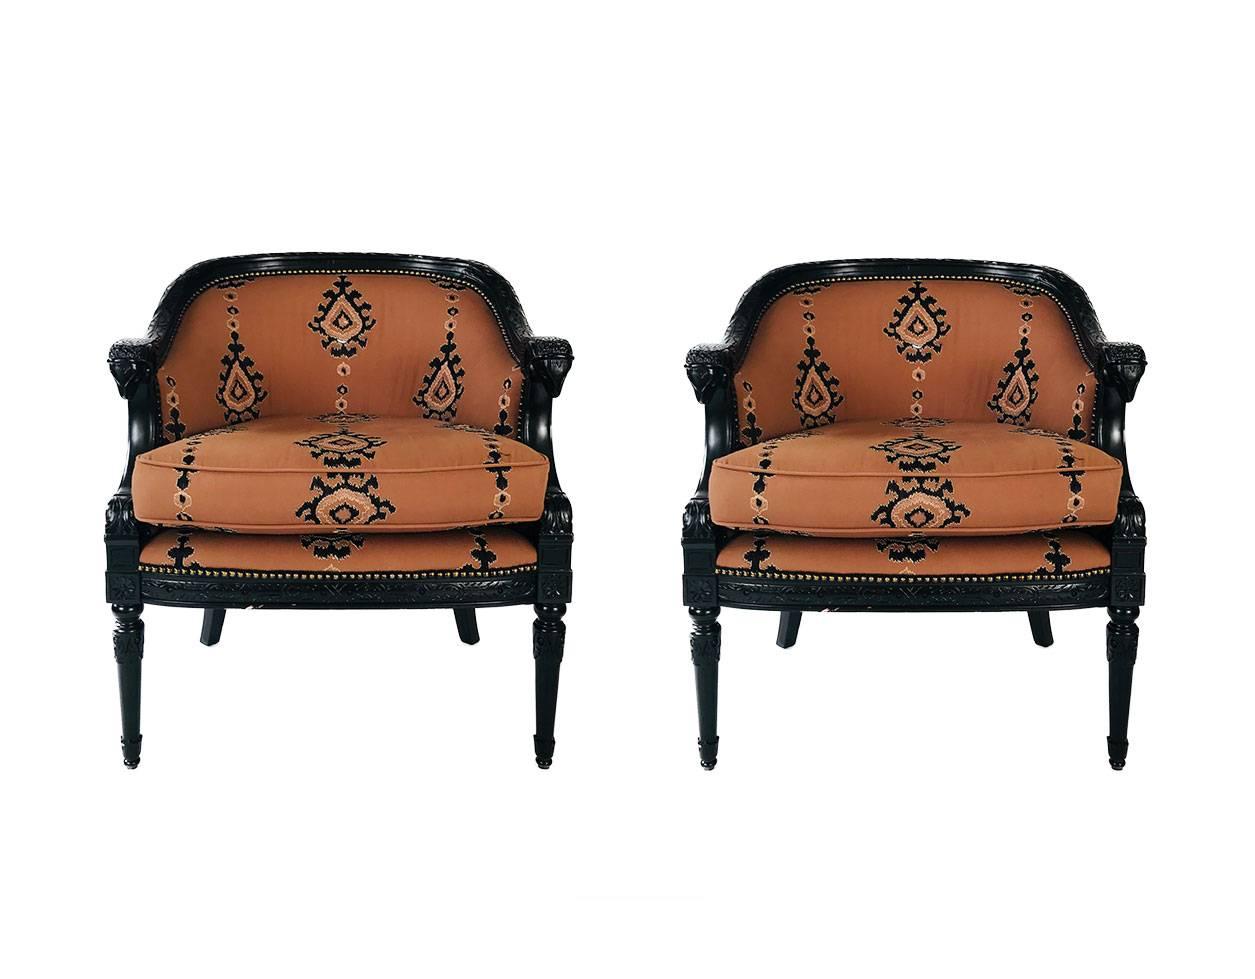 Contemporary pair of Louis XVI style tub chairs, recently recovered in a beautiful wool sateen with embroidered paisley finished with a nailhead detail. The lounge chairs feature beautiful black lacquer   carved ram-heads armrests. 

